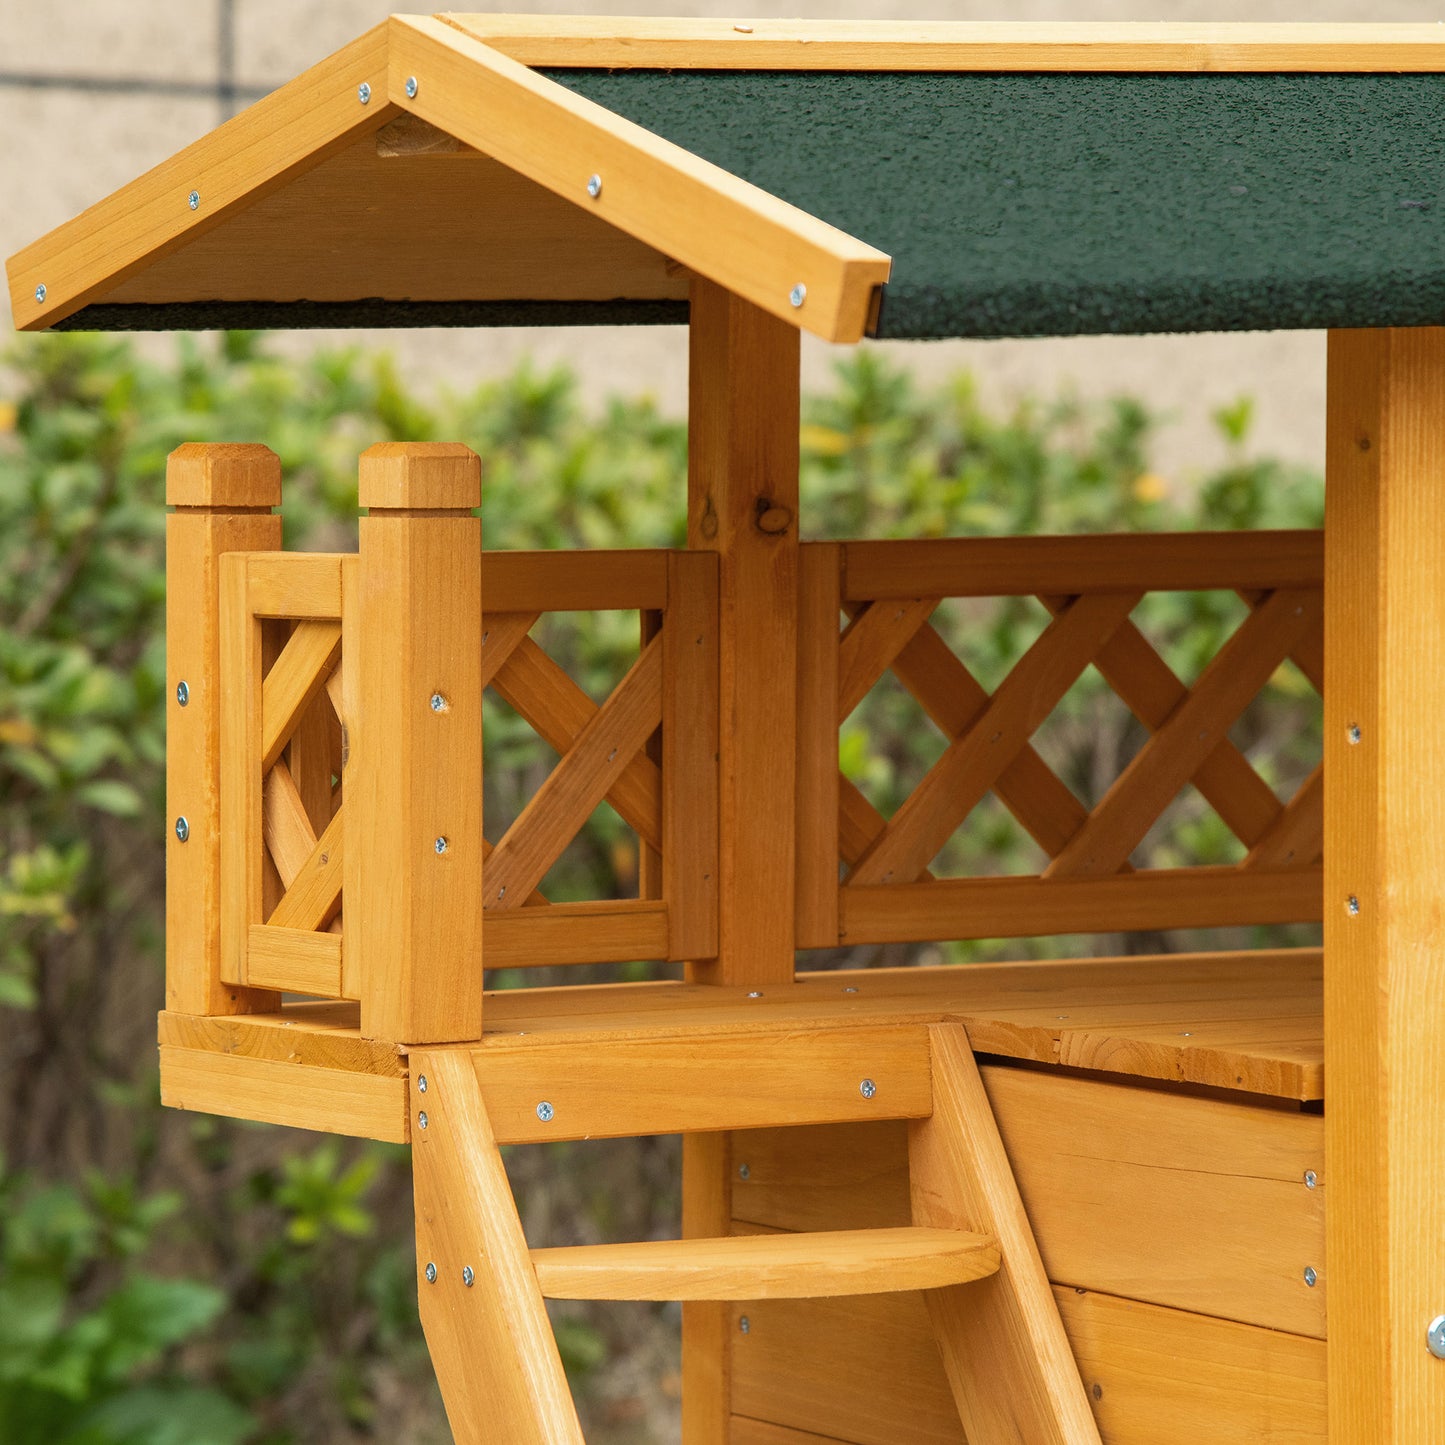 PawHut Cat House Outdoor Kitten Shelter Puppy Kennel with Balcony Stairs Asphalt Roof, 77 x 50 x 73 cm, Natural